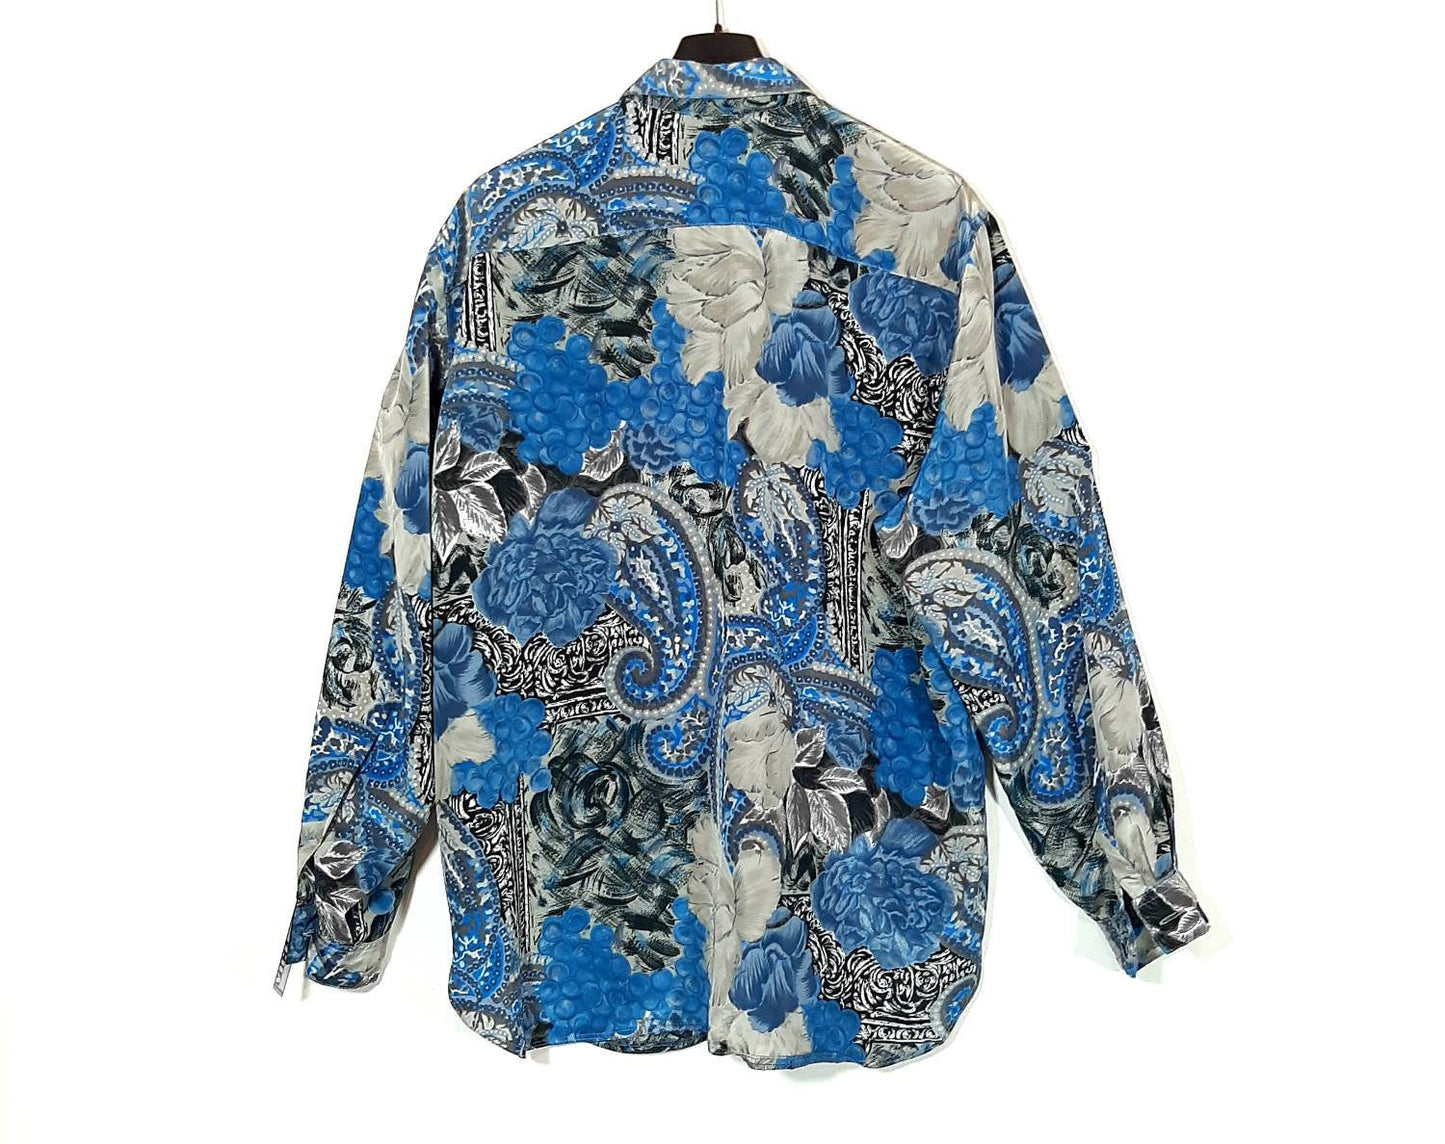 New Moon satin Floral-baroque blue / grey floral shirt 1980s Italy